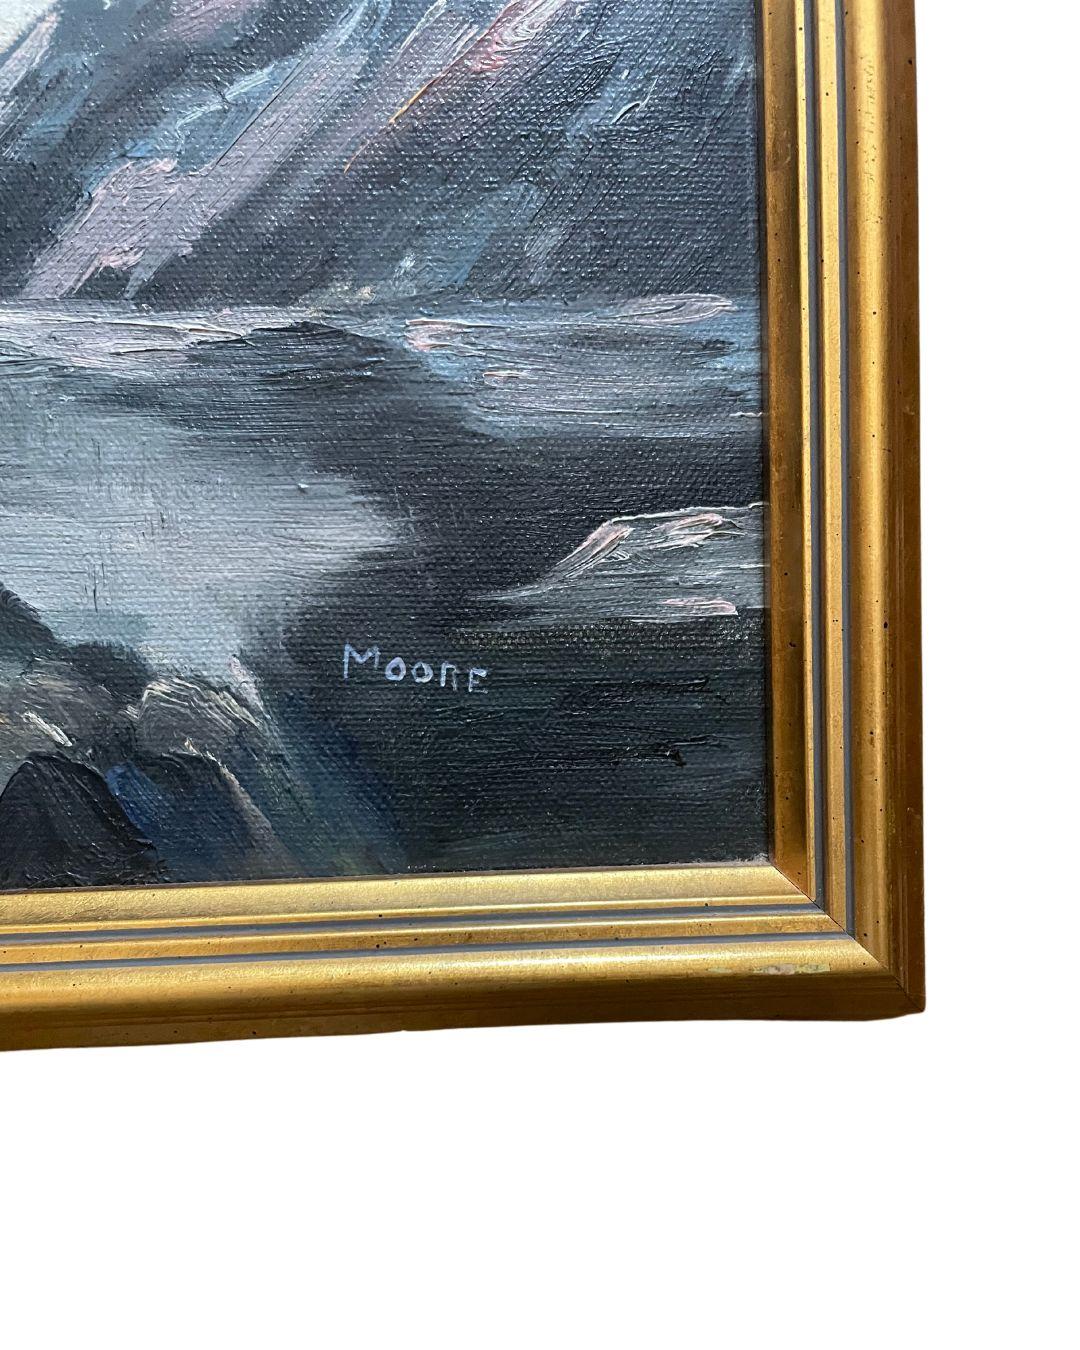 Vintage seascape painting in a carved gilt wood frame. Signed at lower right: MOORE

Dimensions: 19.75